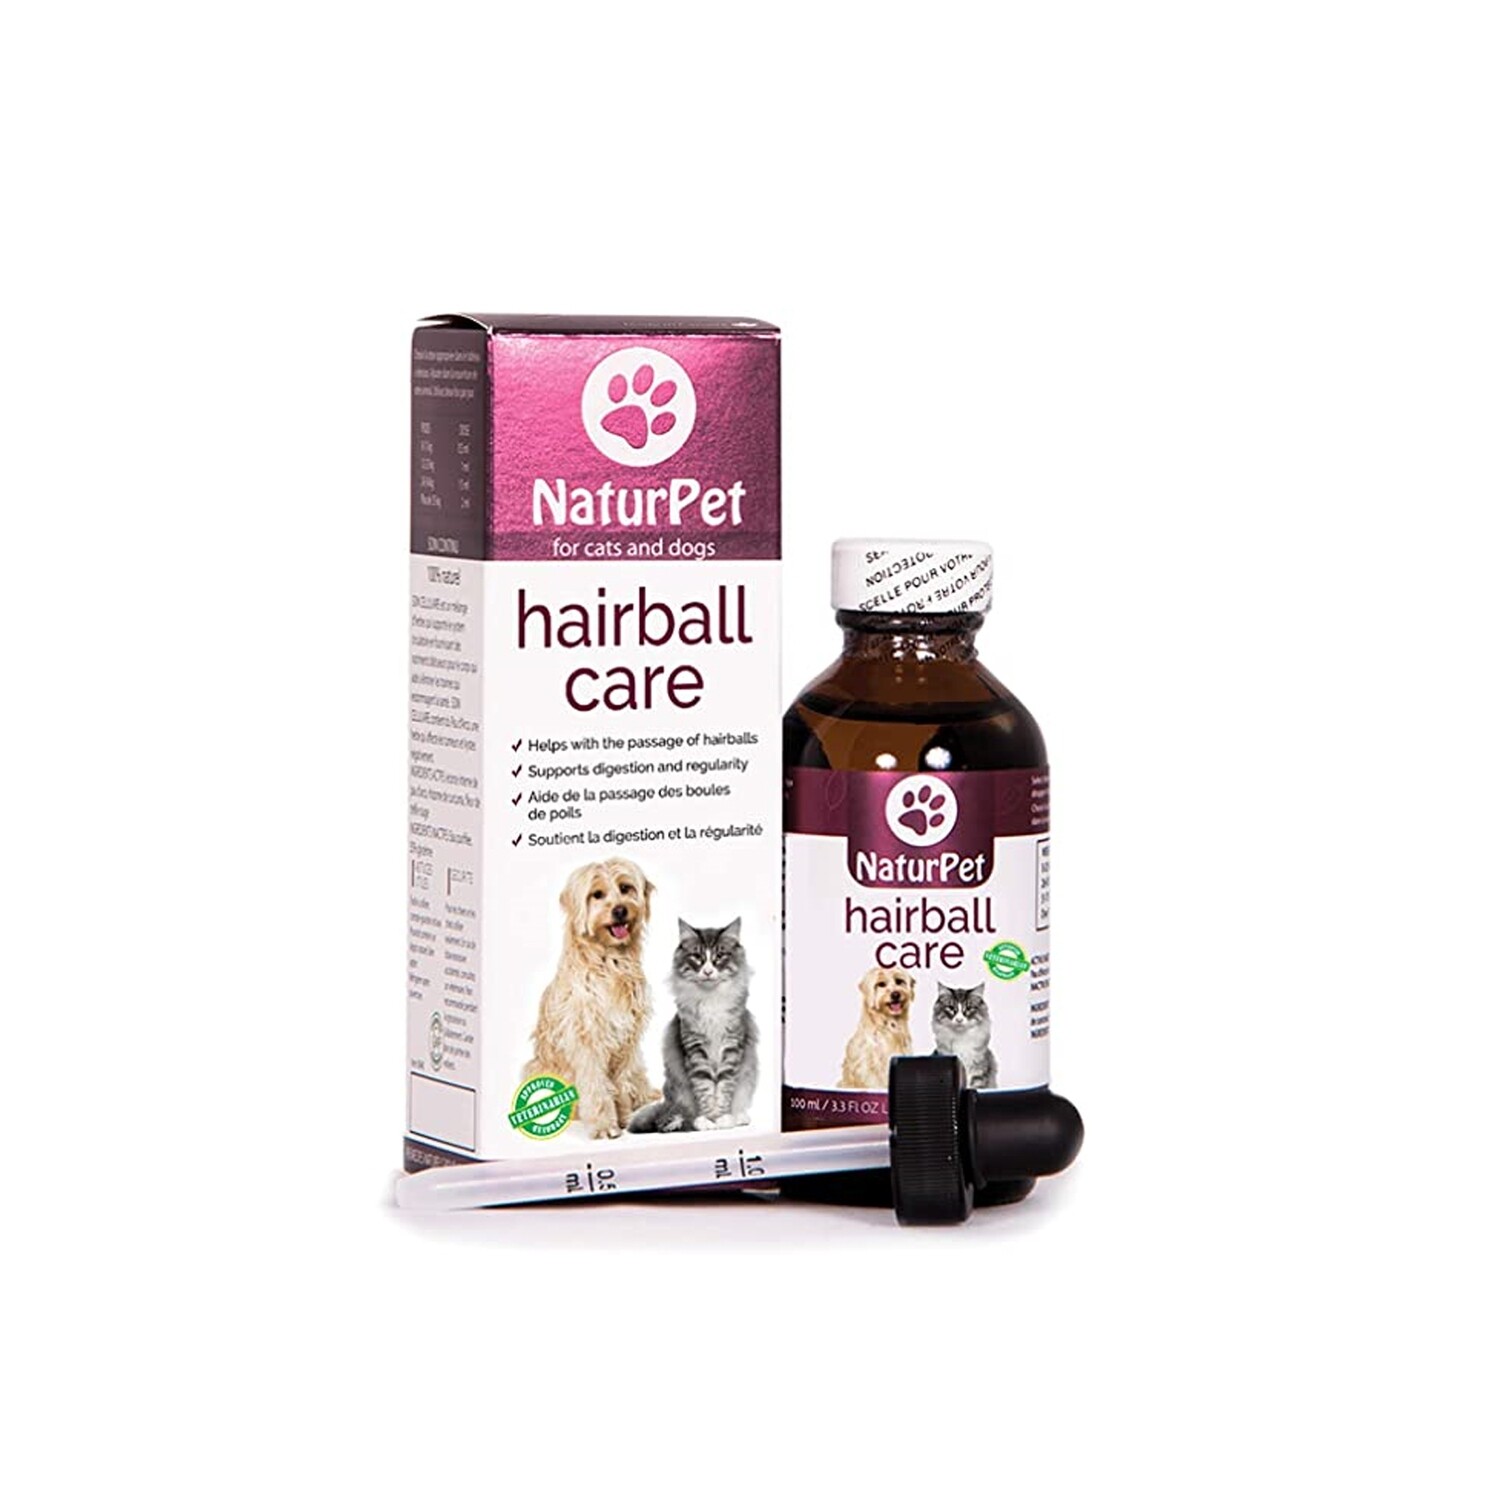 NATURPET Hairball Care for cats and dogs